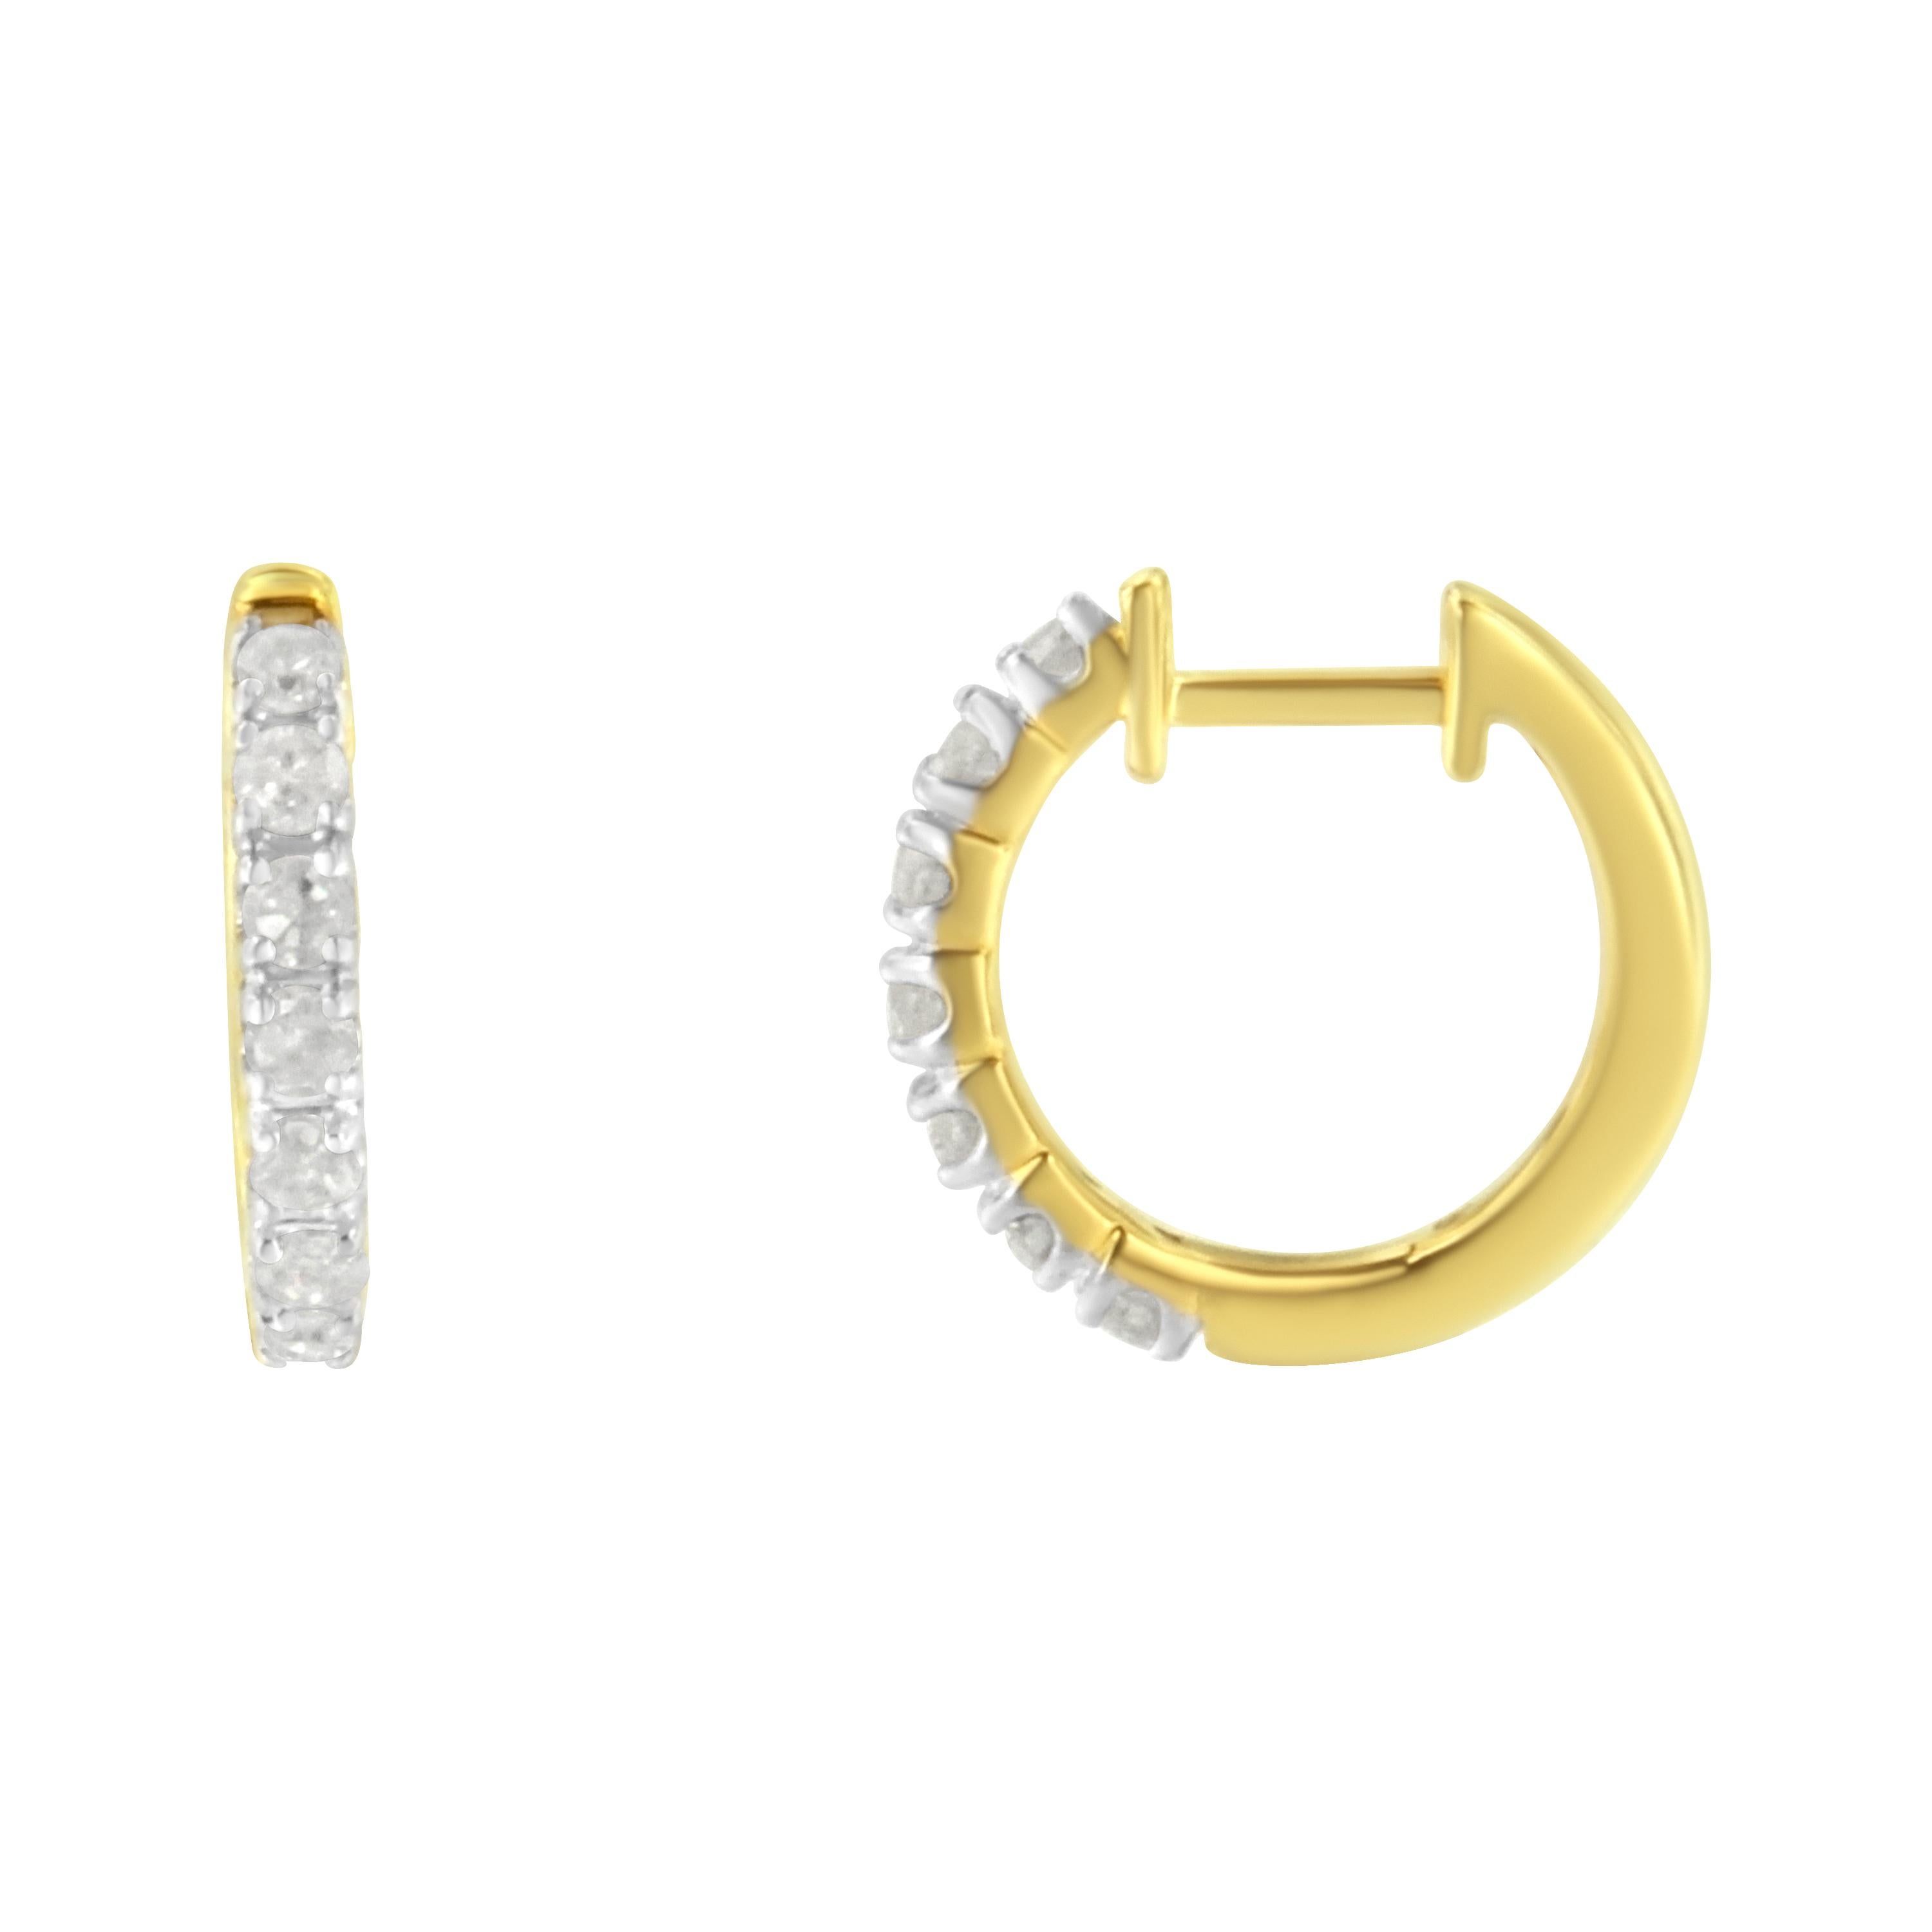 Fashioned in stunning 10k yellow gold, these beautiful huggy hoop earrings feature 1/2ct of brilliant round cut diamonds in a prong setting that delicately flow half way around the outside of the hoop. A classic piece you can wear everyday.

'Video